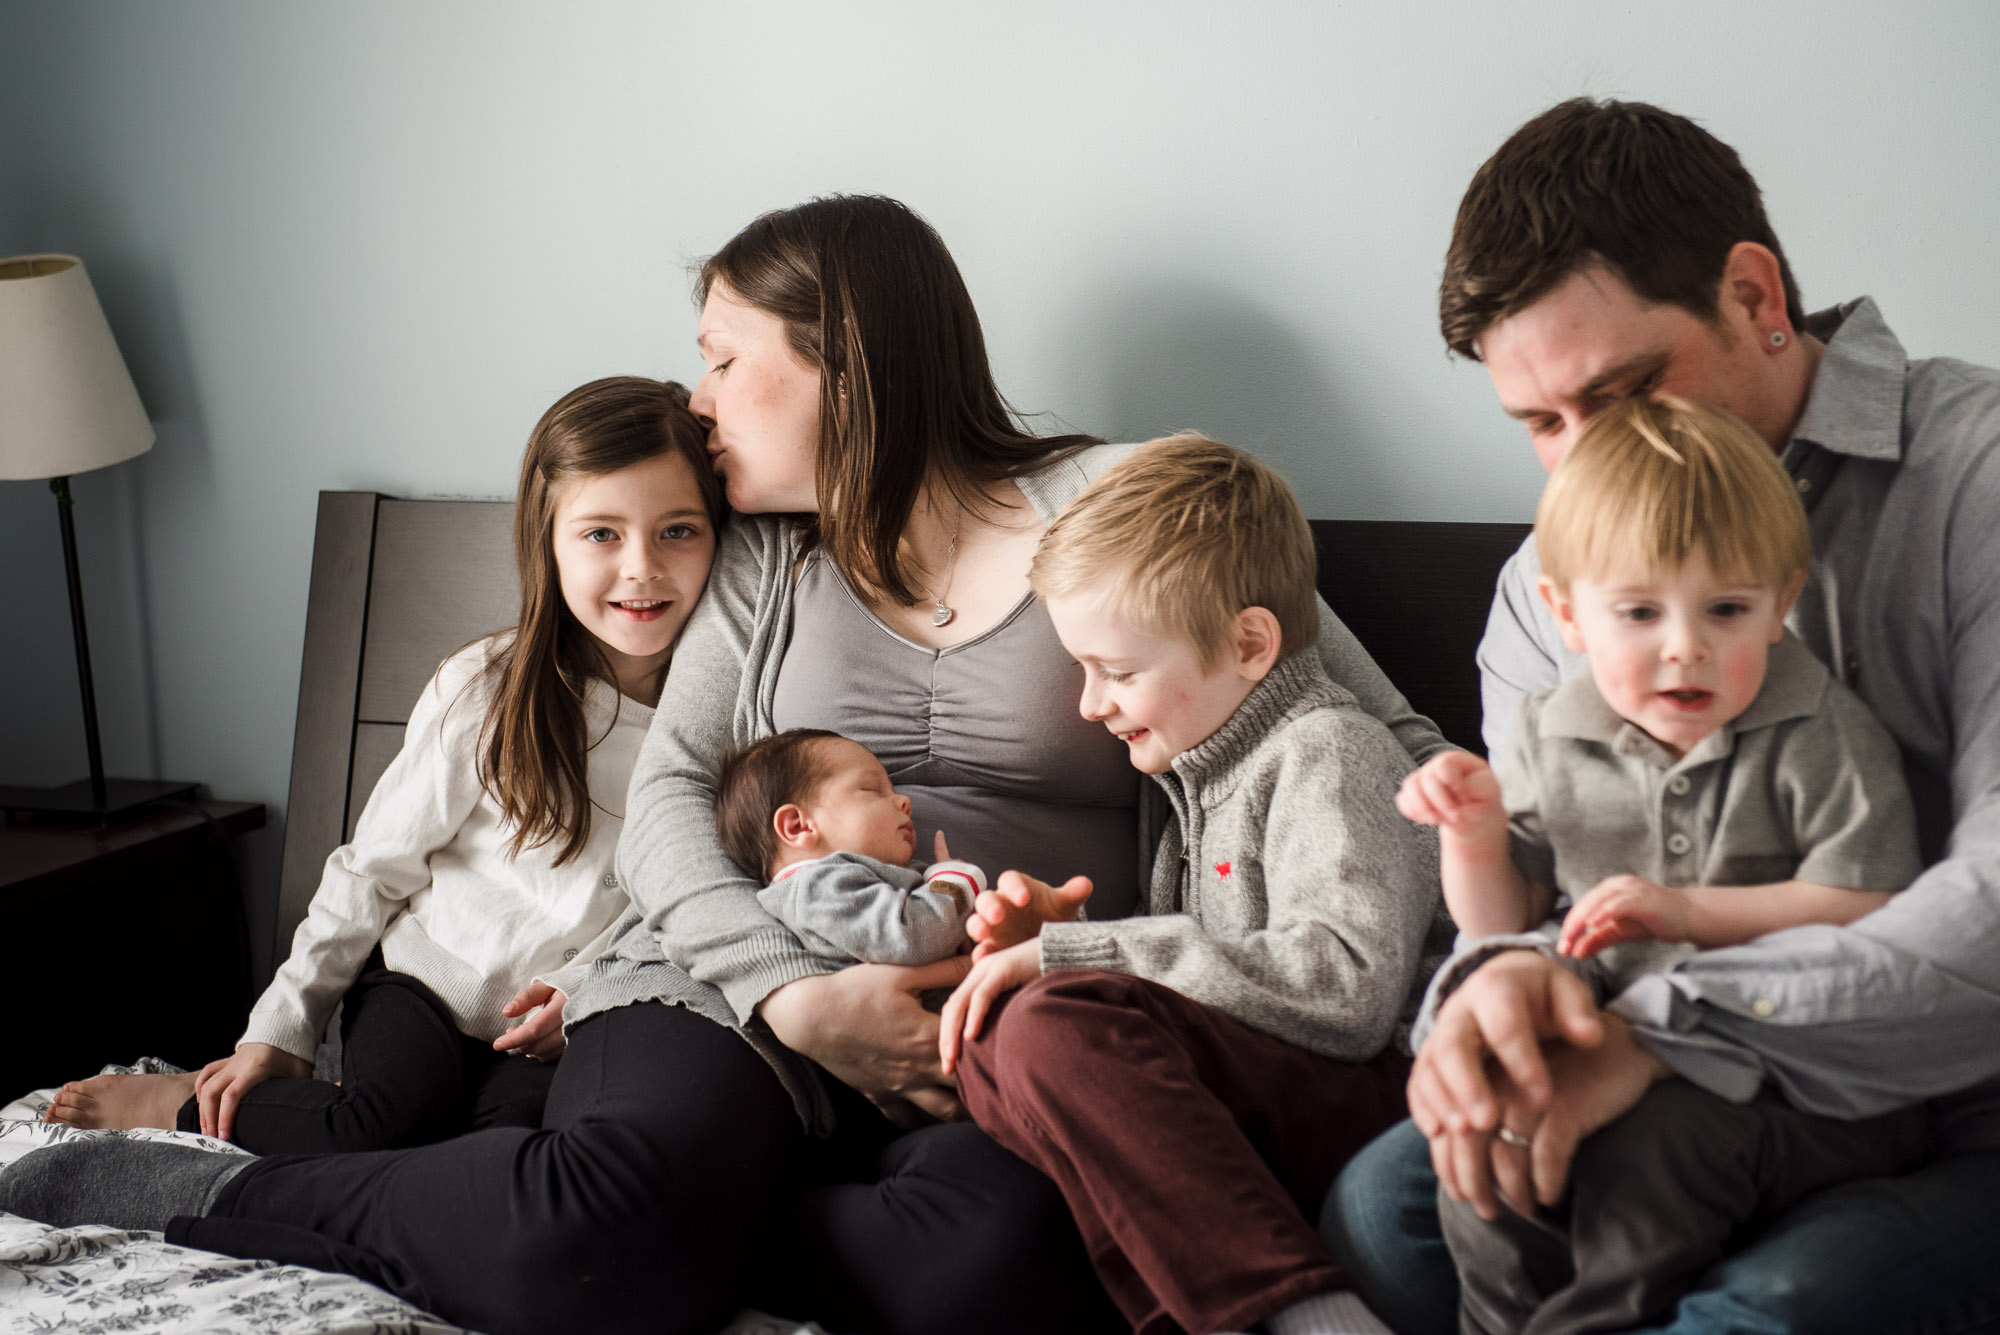 A casual family portrait as part of a lifestyle edmonton newborn photo session featuring 4 siblings and praents. 